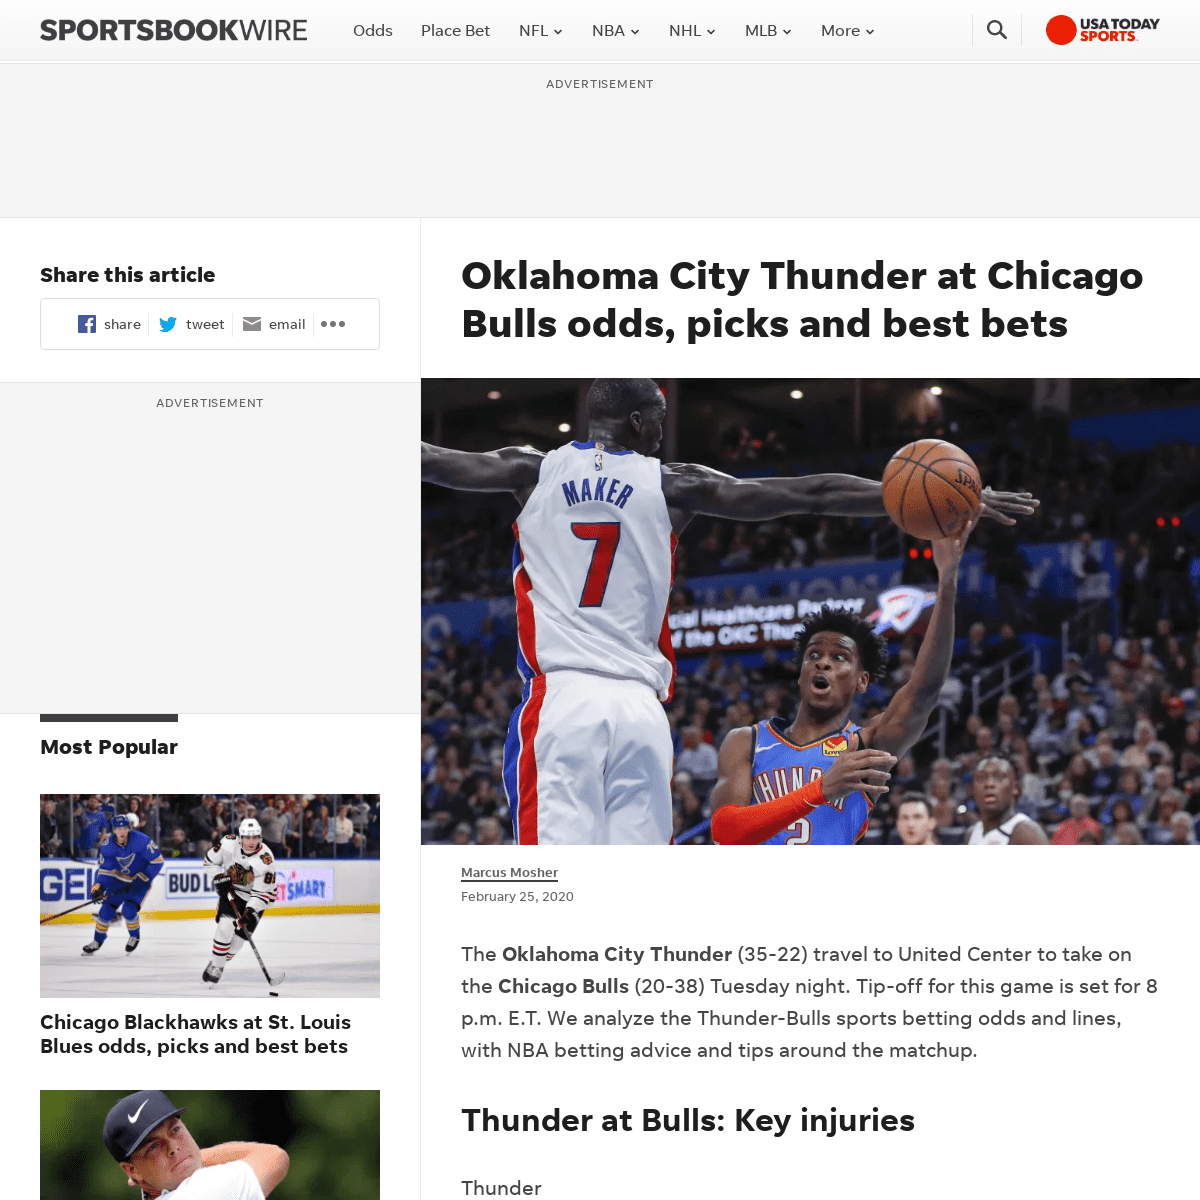 A complete backup of sportsbookwire.usatoday.com/2020/02/25/oklahoma-city-thunder-at-chicago-bulls-odds-picks-and-best-bets/